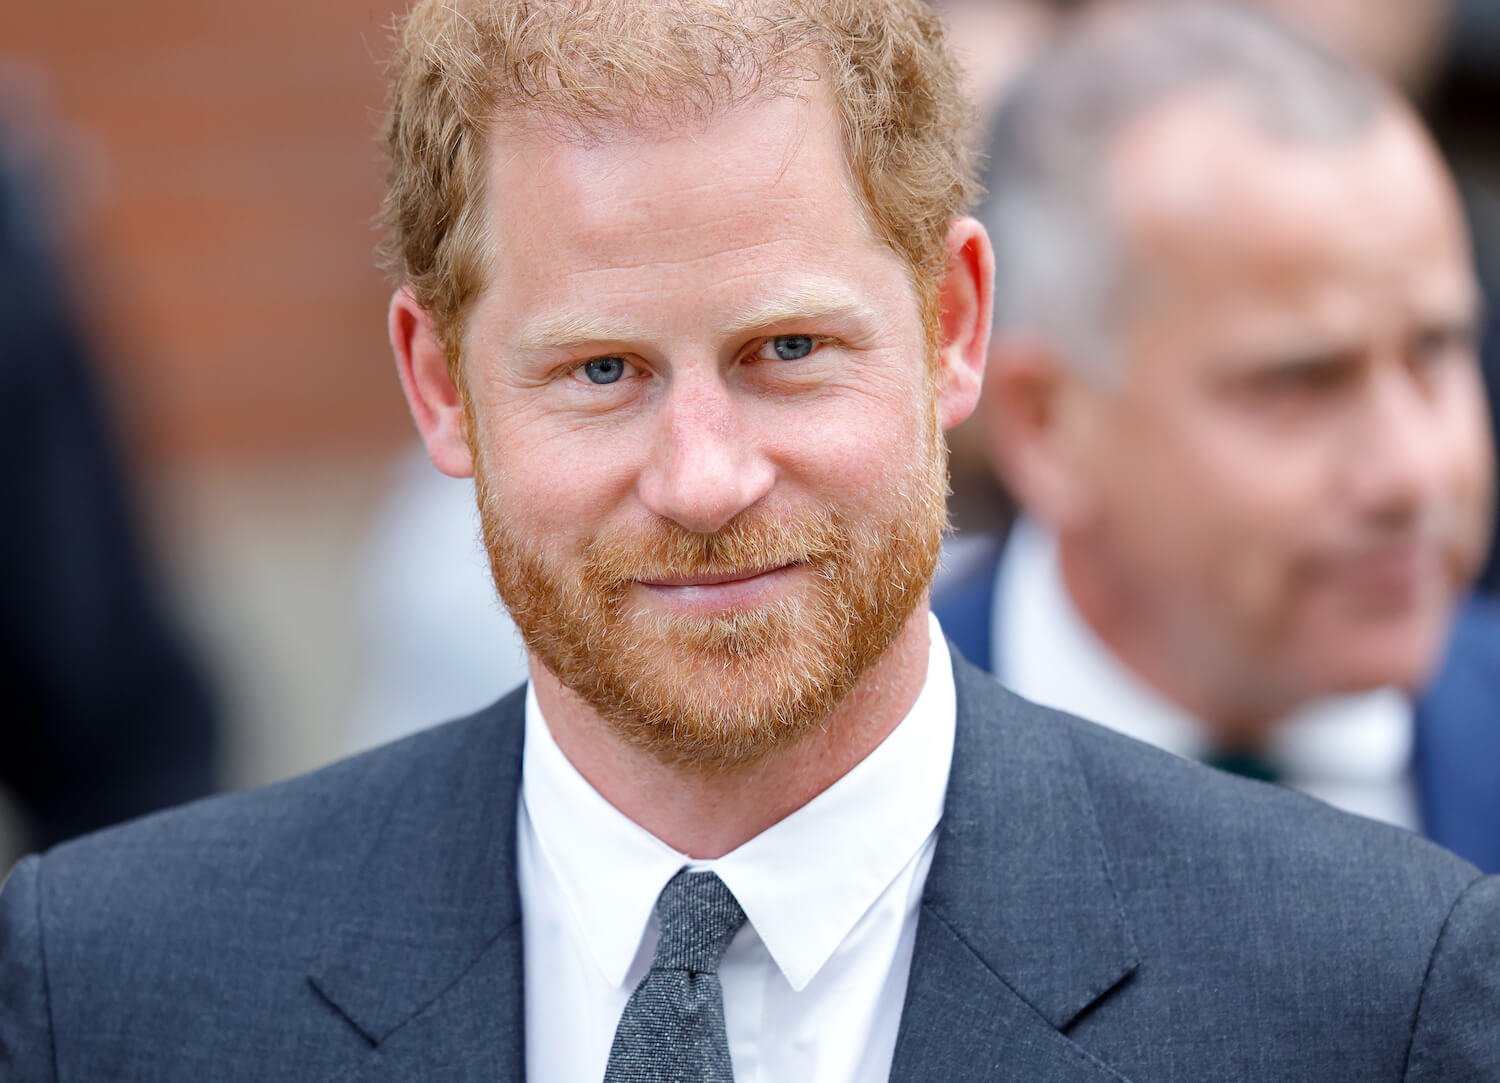 Prince Harry gives a closed mouth smile while walking, wearing a suit and tie